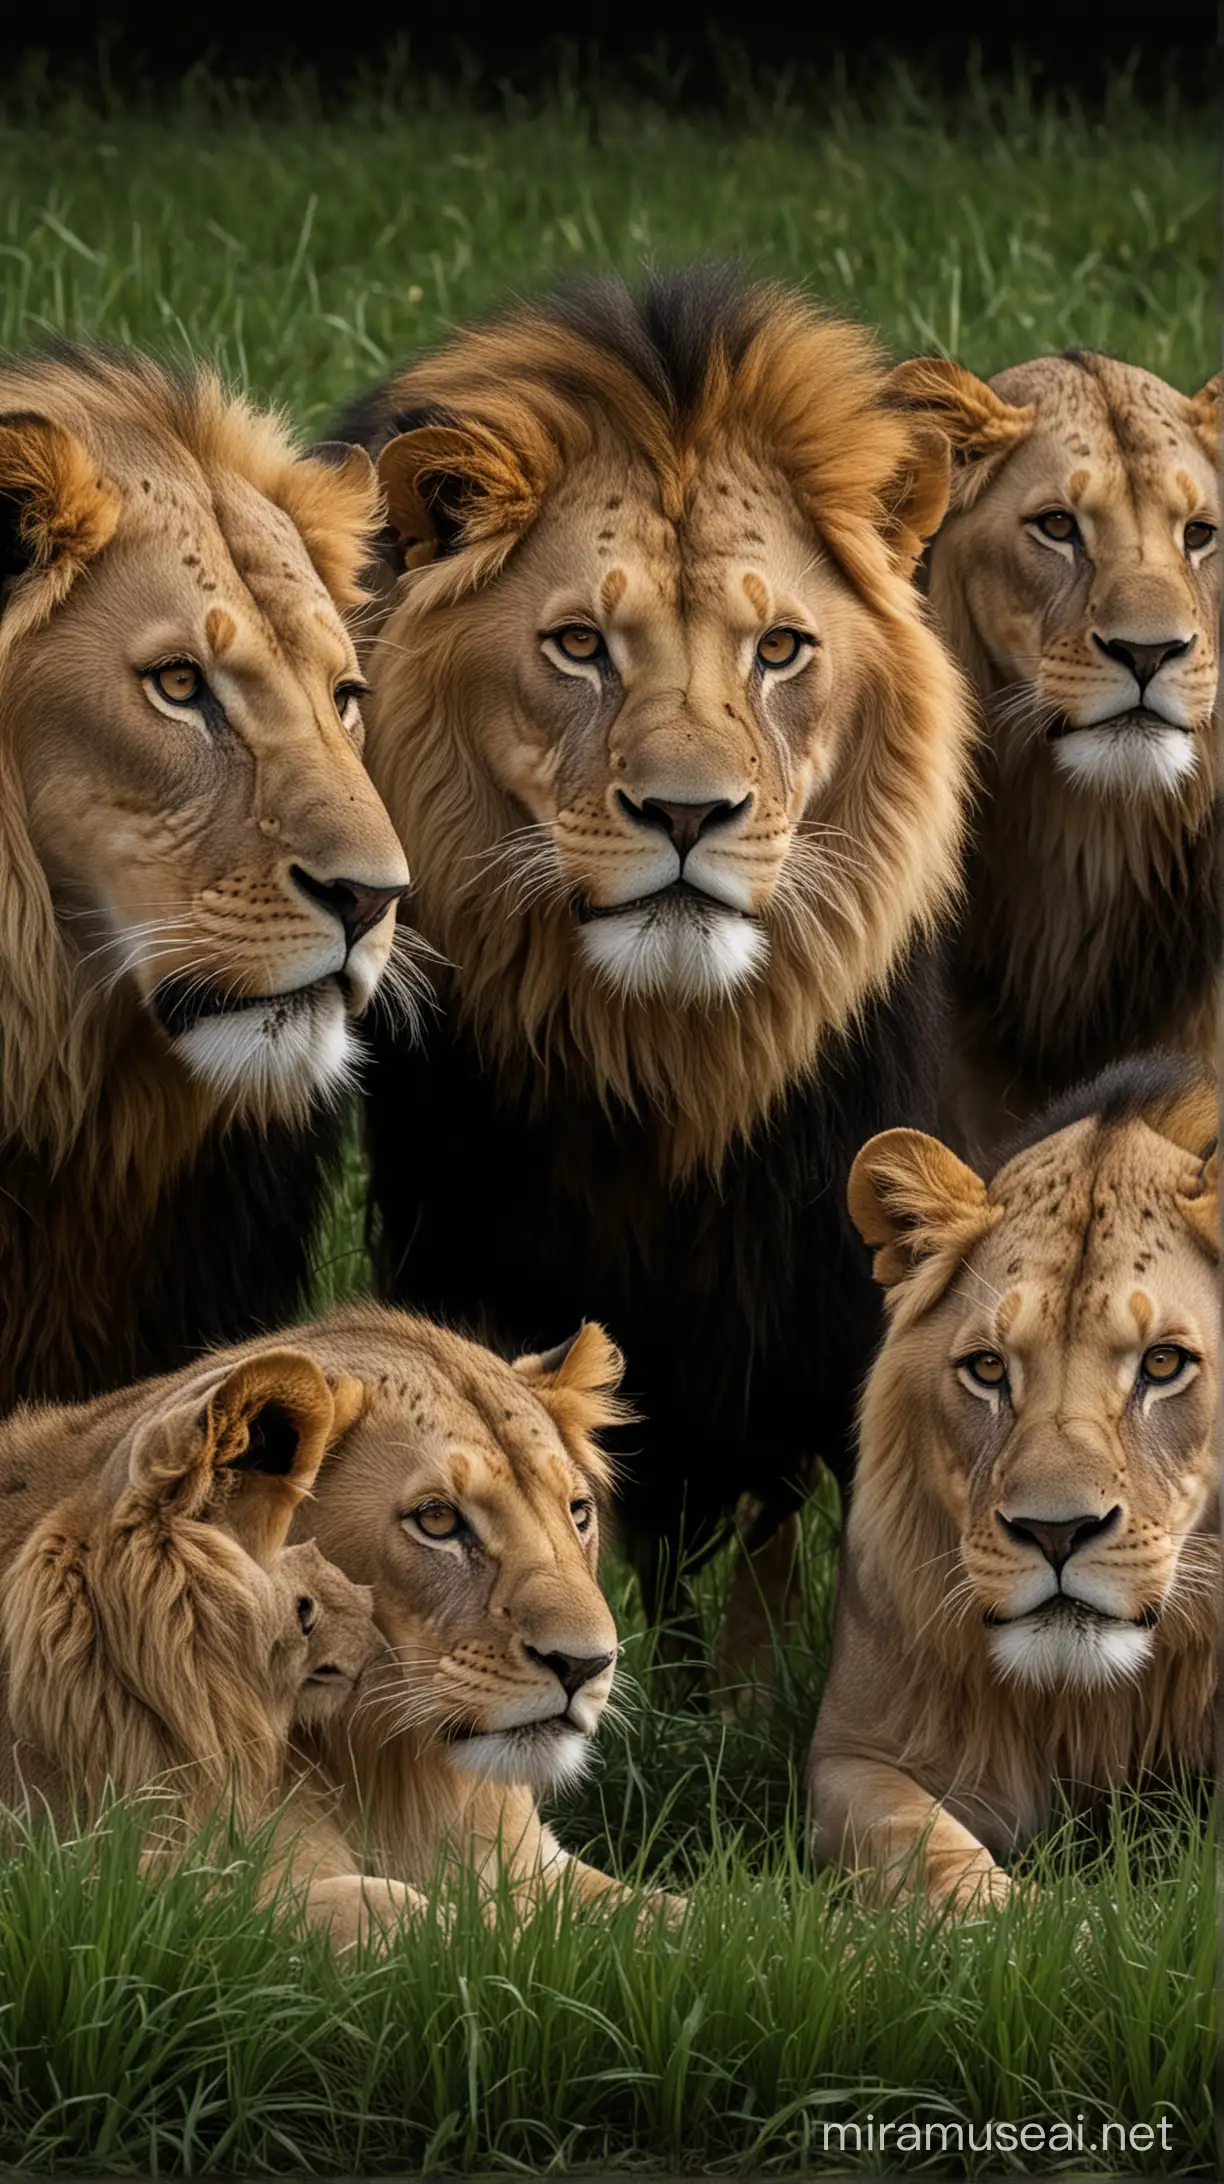 Pride of Lions Camouflaged in Tall Grass against Dark Background